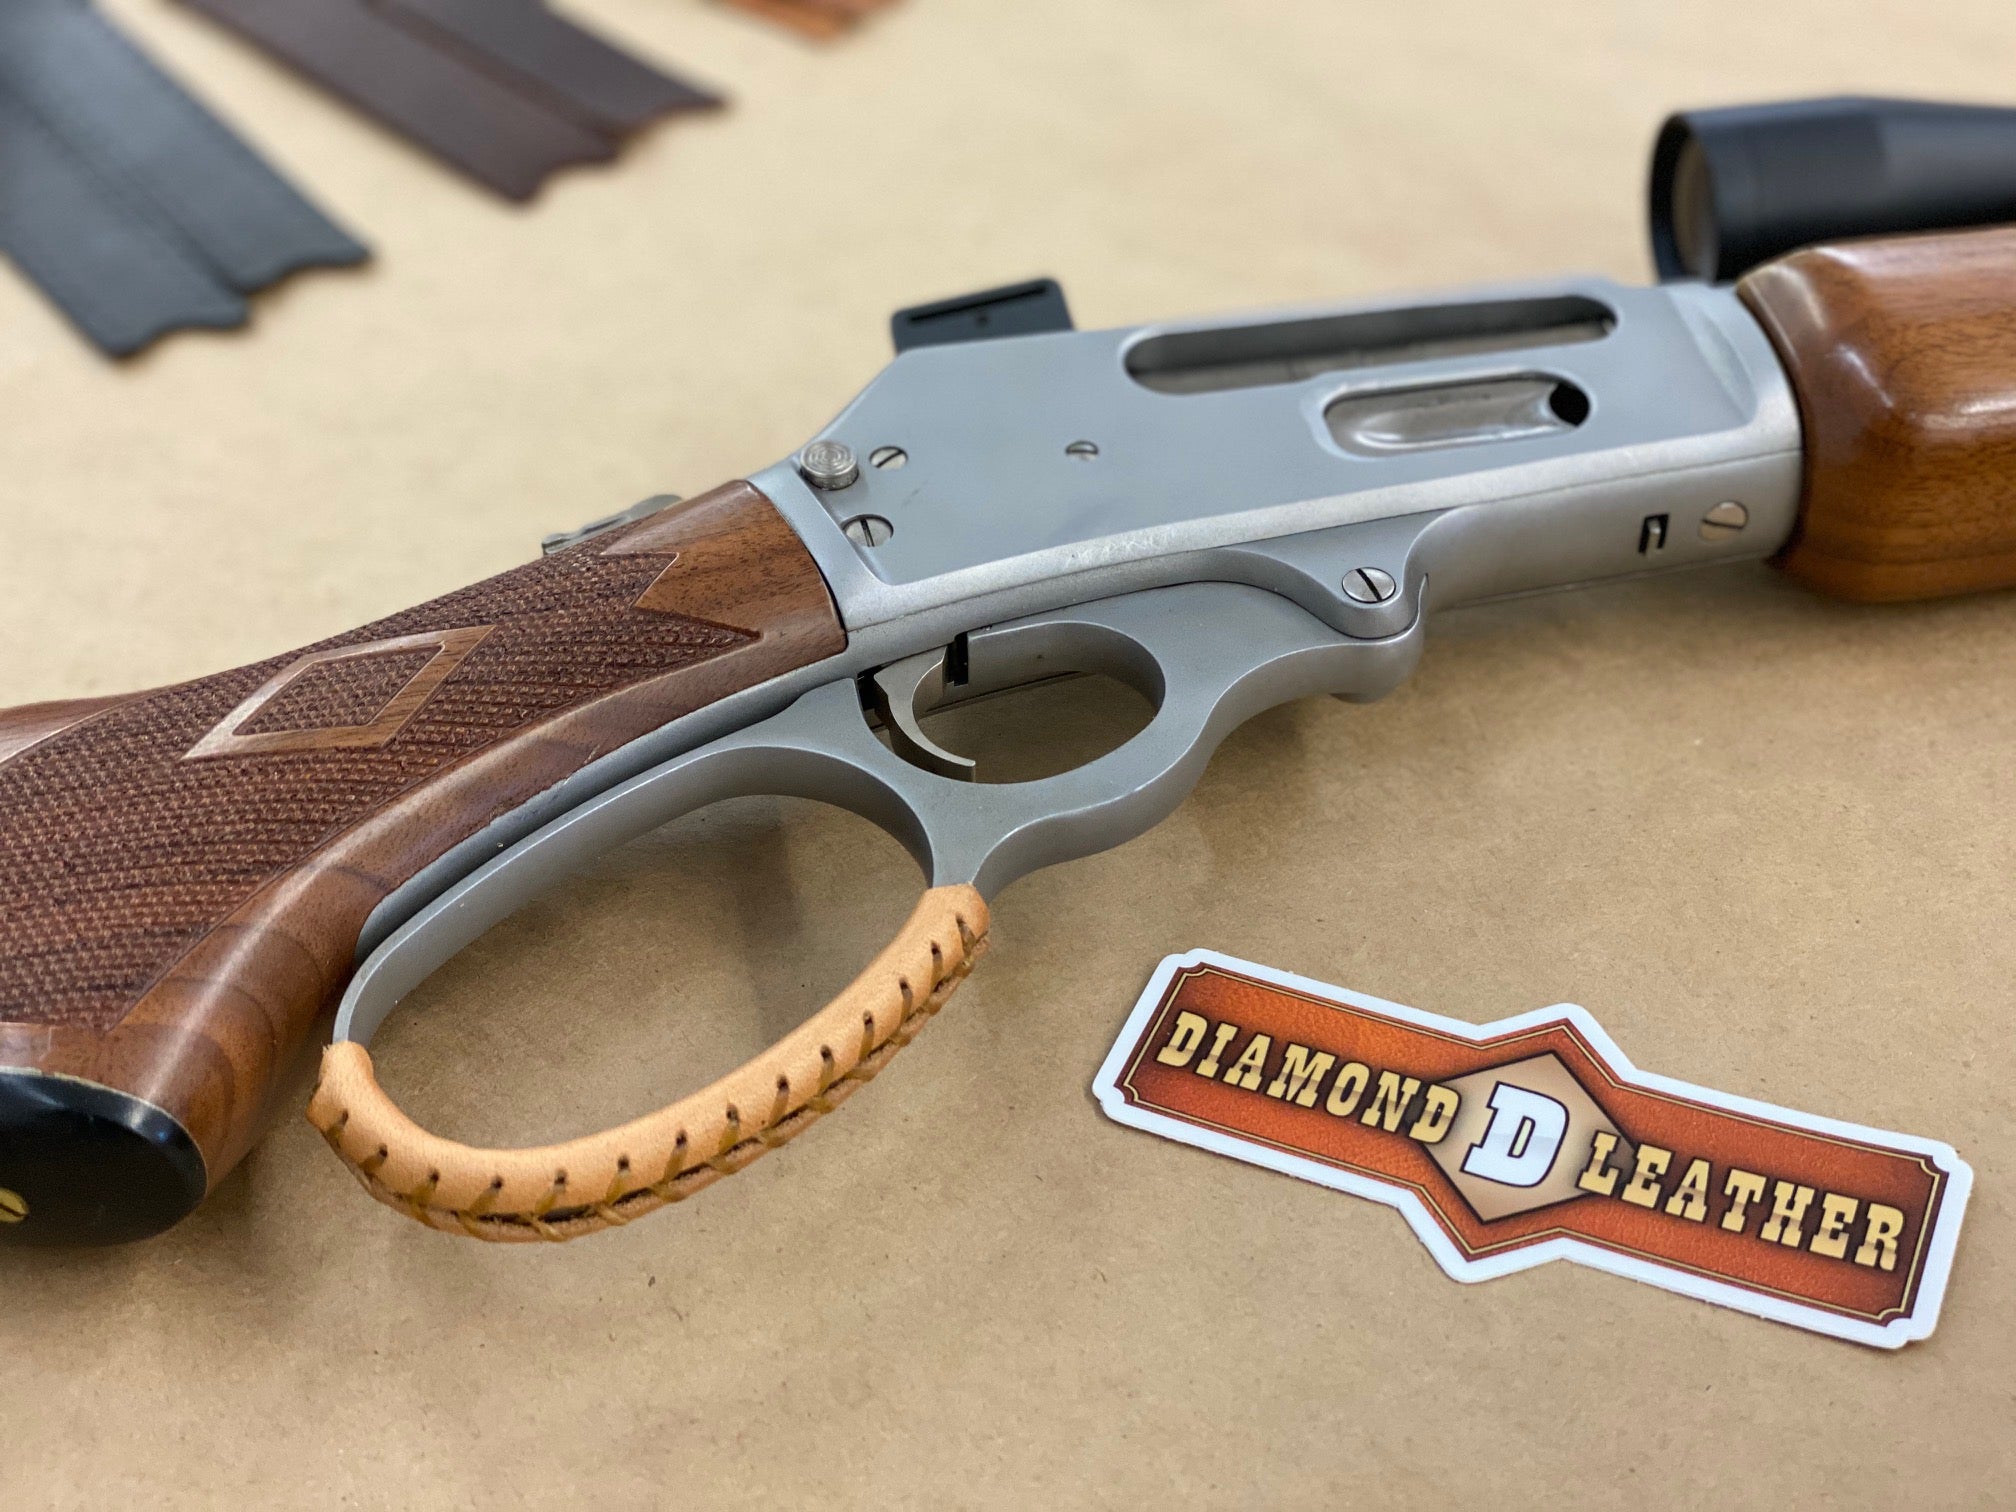 Leather Lever Wrap Cover Kit for Lever-Action Rifles and Shotguns